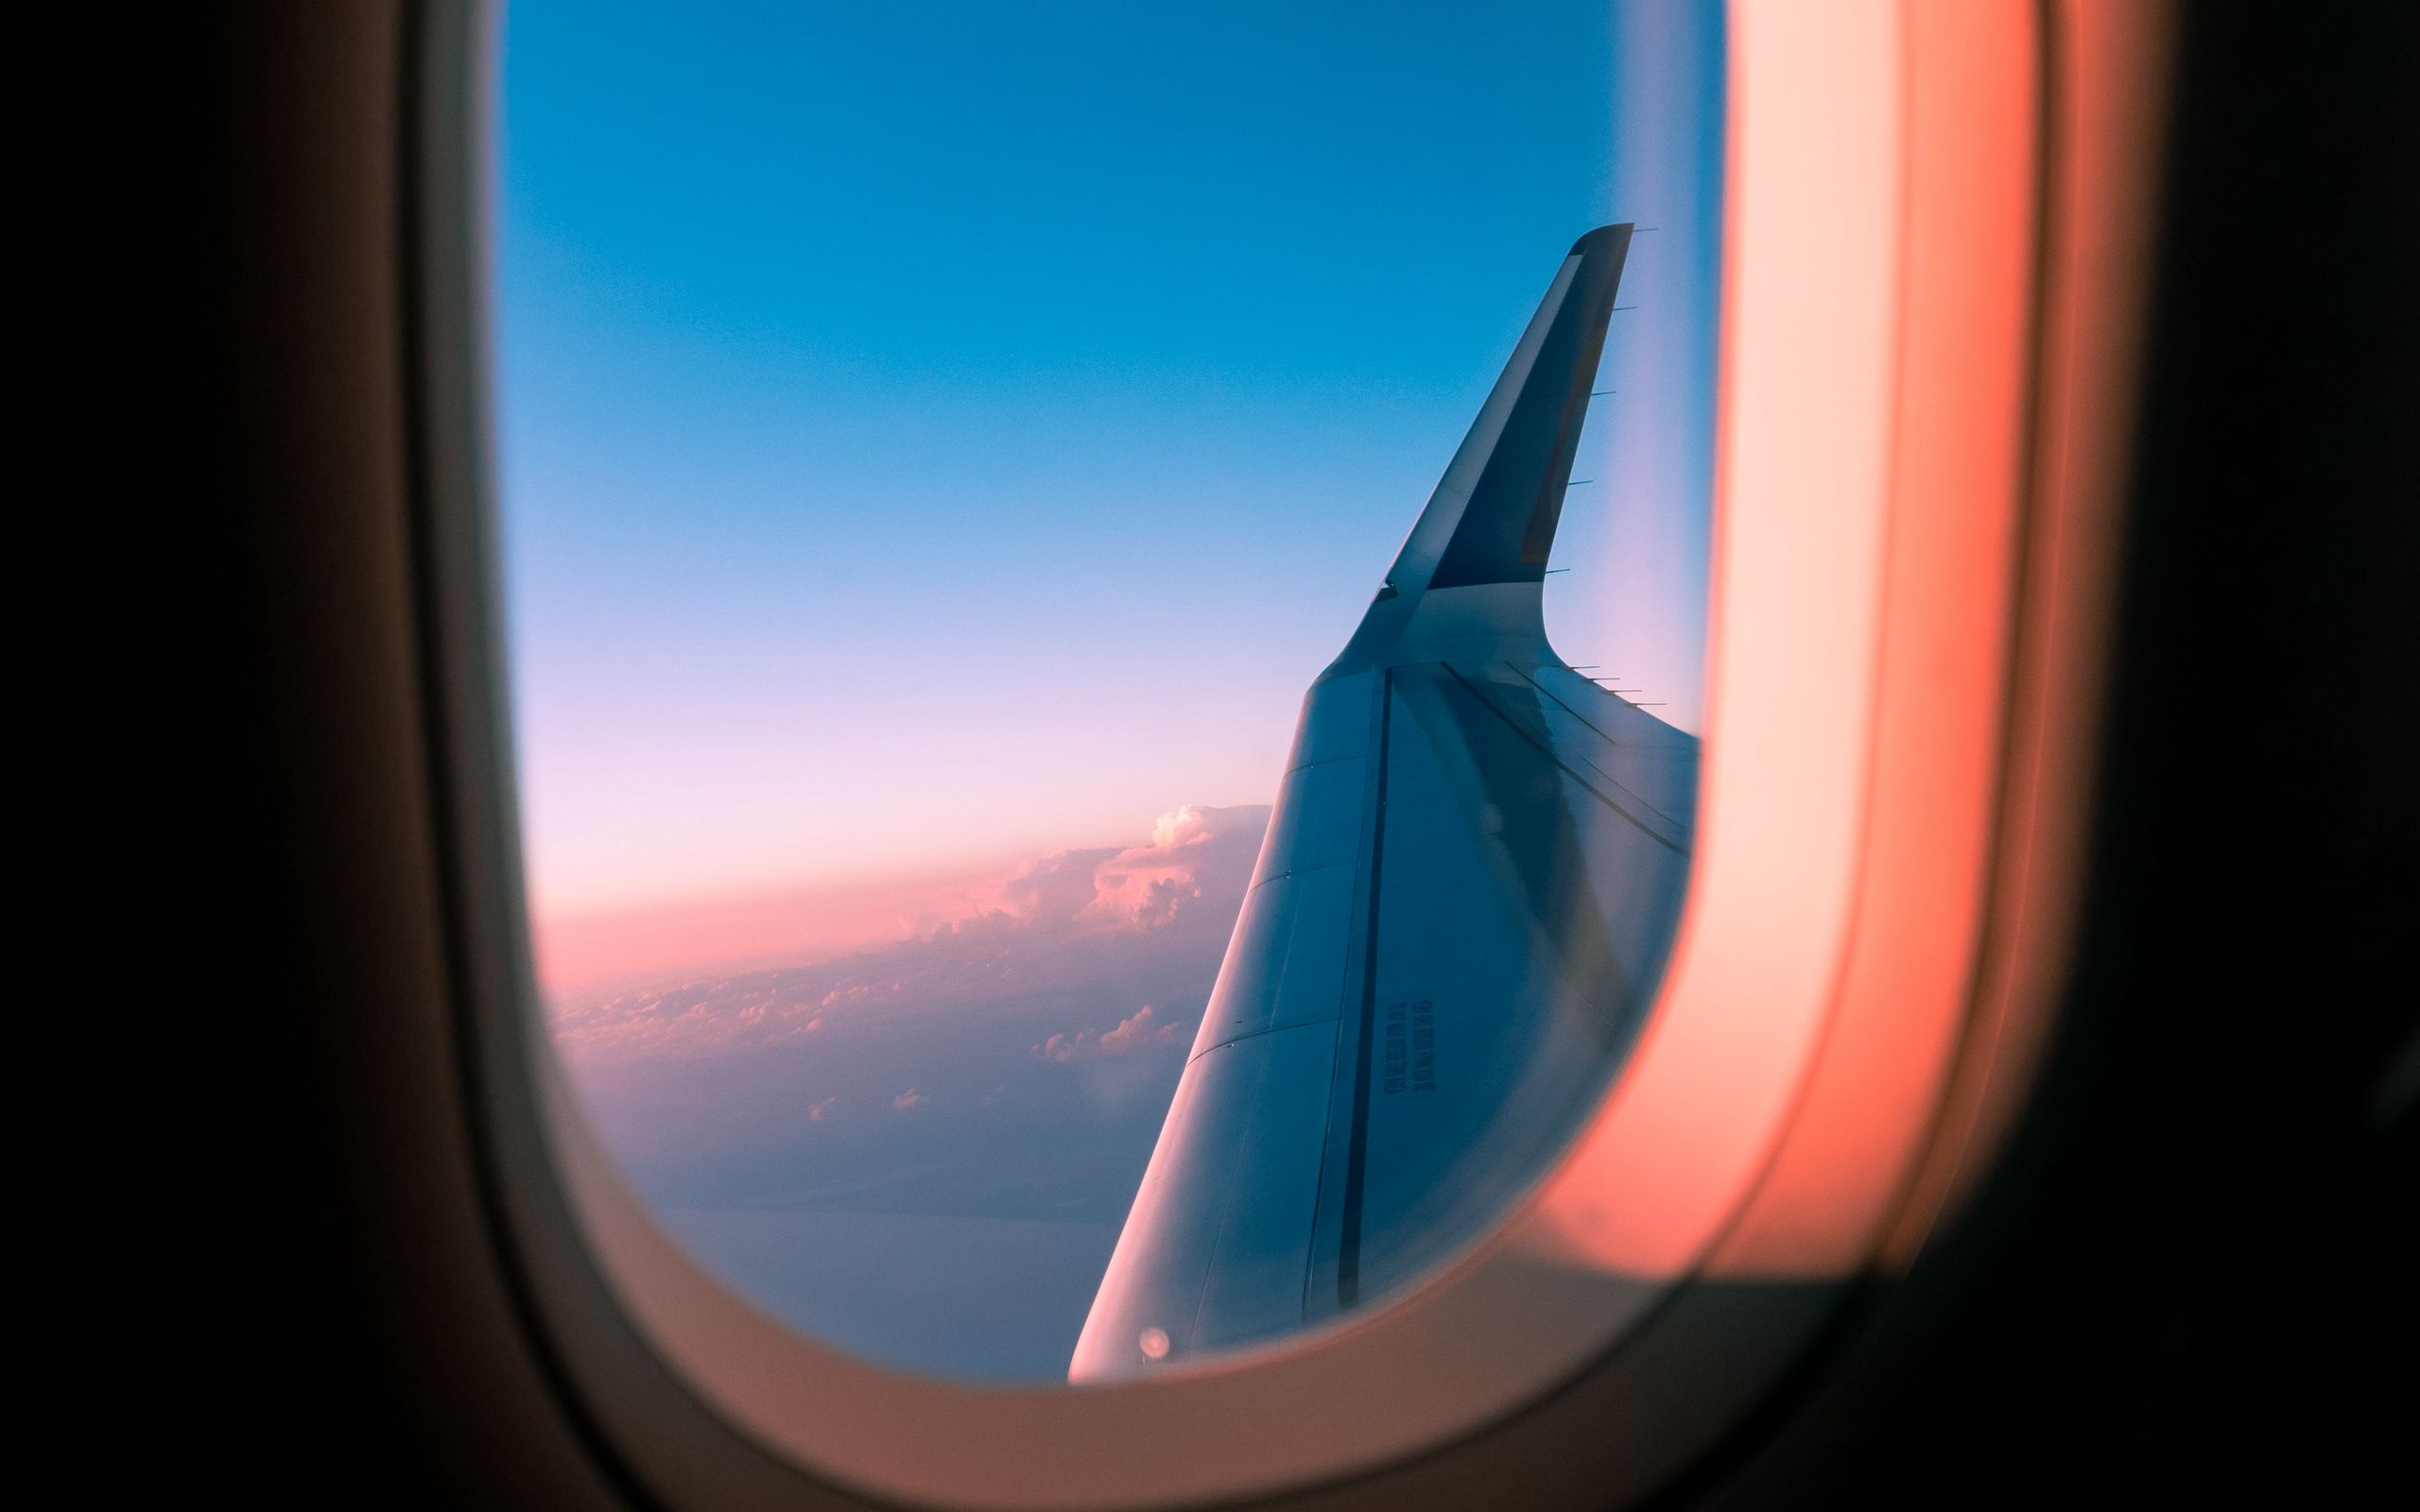 Download wallpaper 2560x1600 airplane, window, porthole, wing, view  widescreen 16:10 hd background